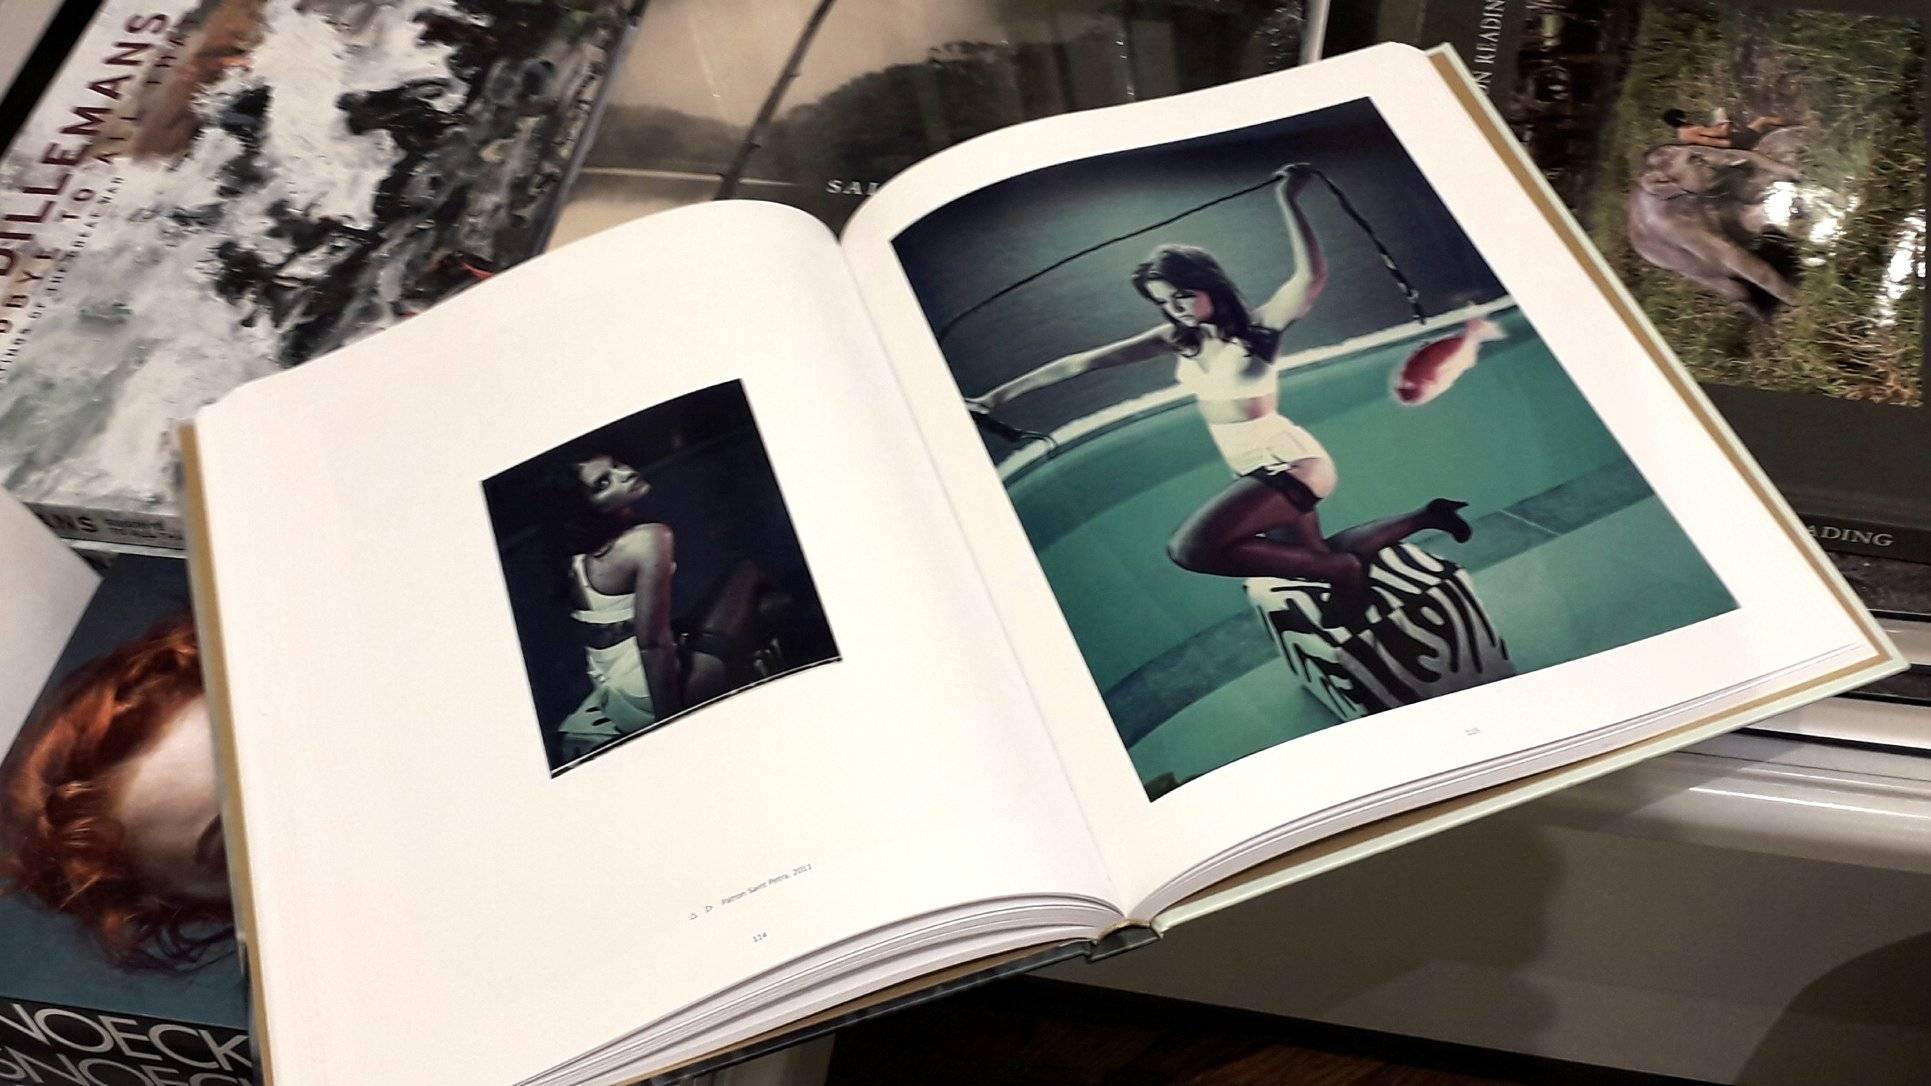 'The Eyes of the Fox' book signed including 'Ways of a wild Heart', Edition of 3 - Black Nude Photograph by Carmen de Vos